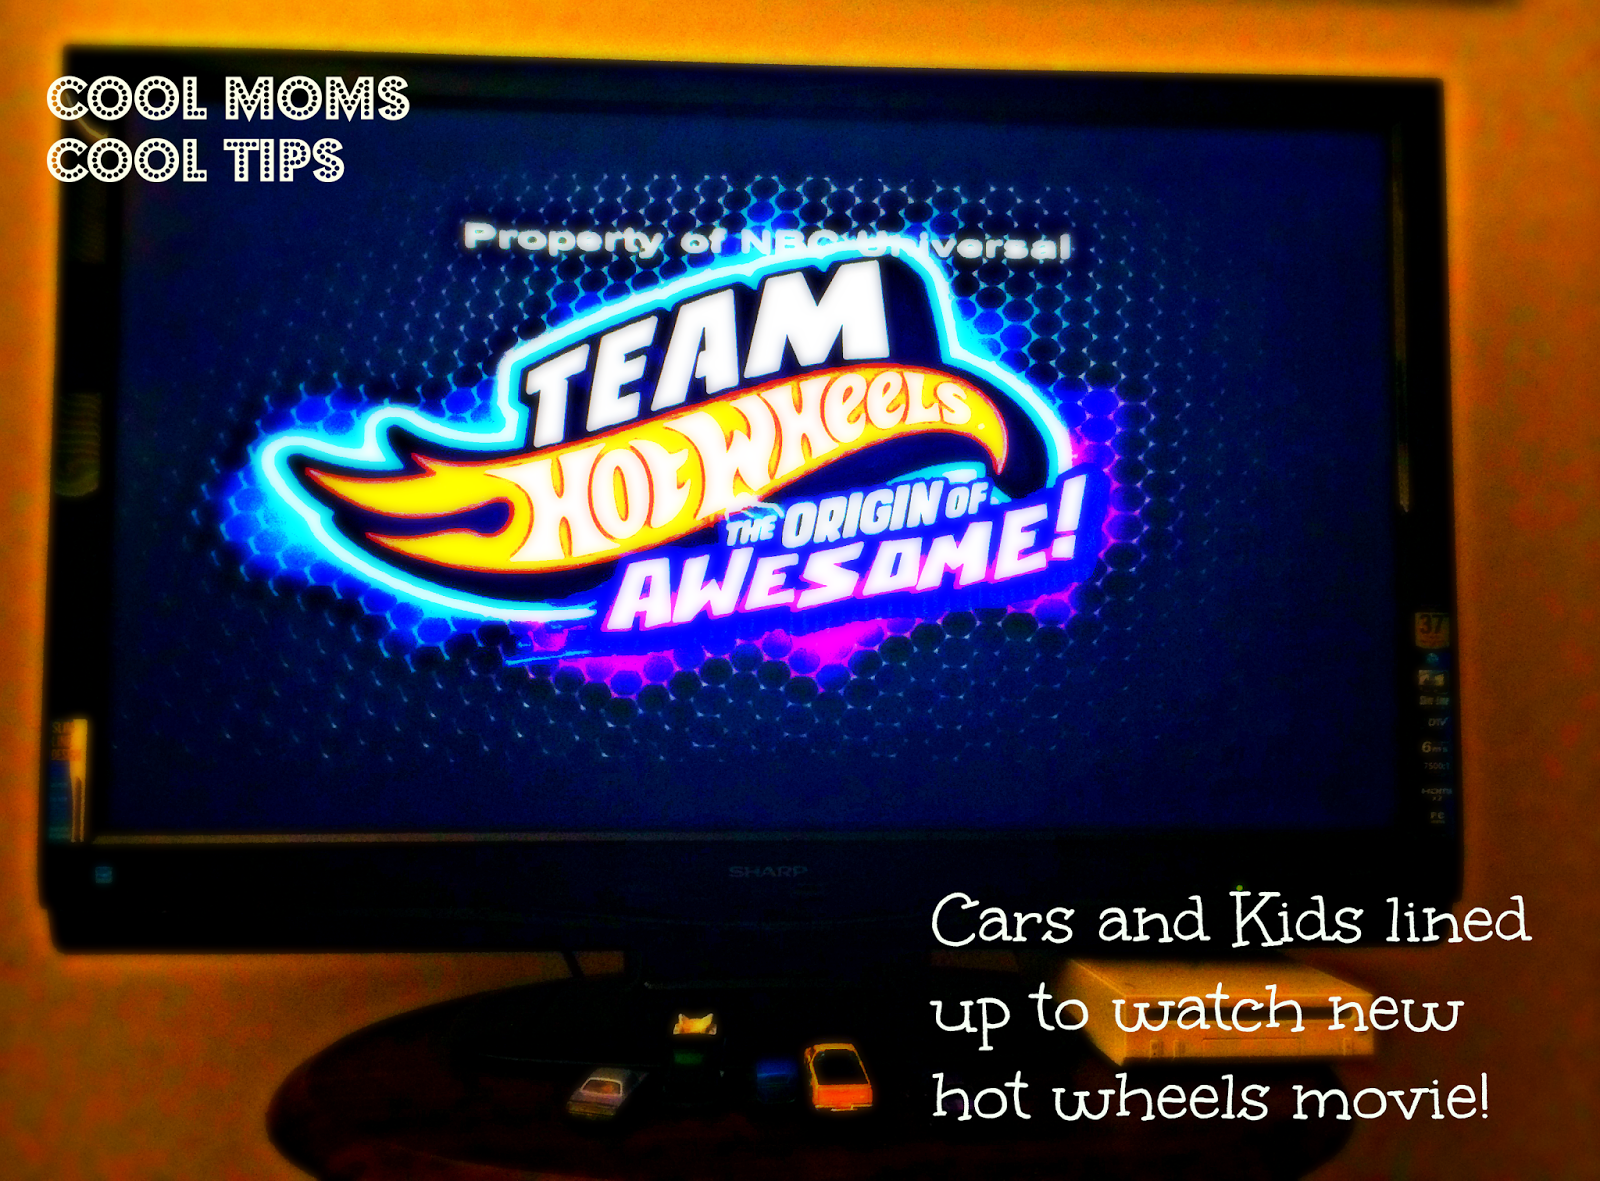 cool moms cool tips hot wheels new movie - team hot wheels the origin of awesome - cars ready to watch